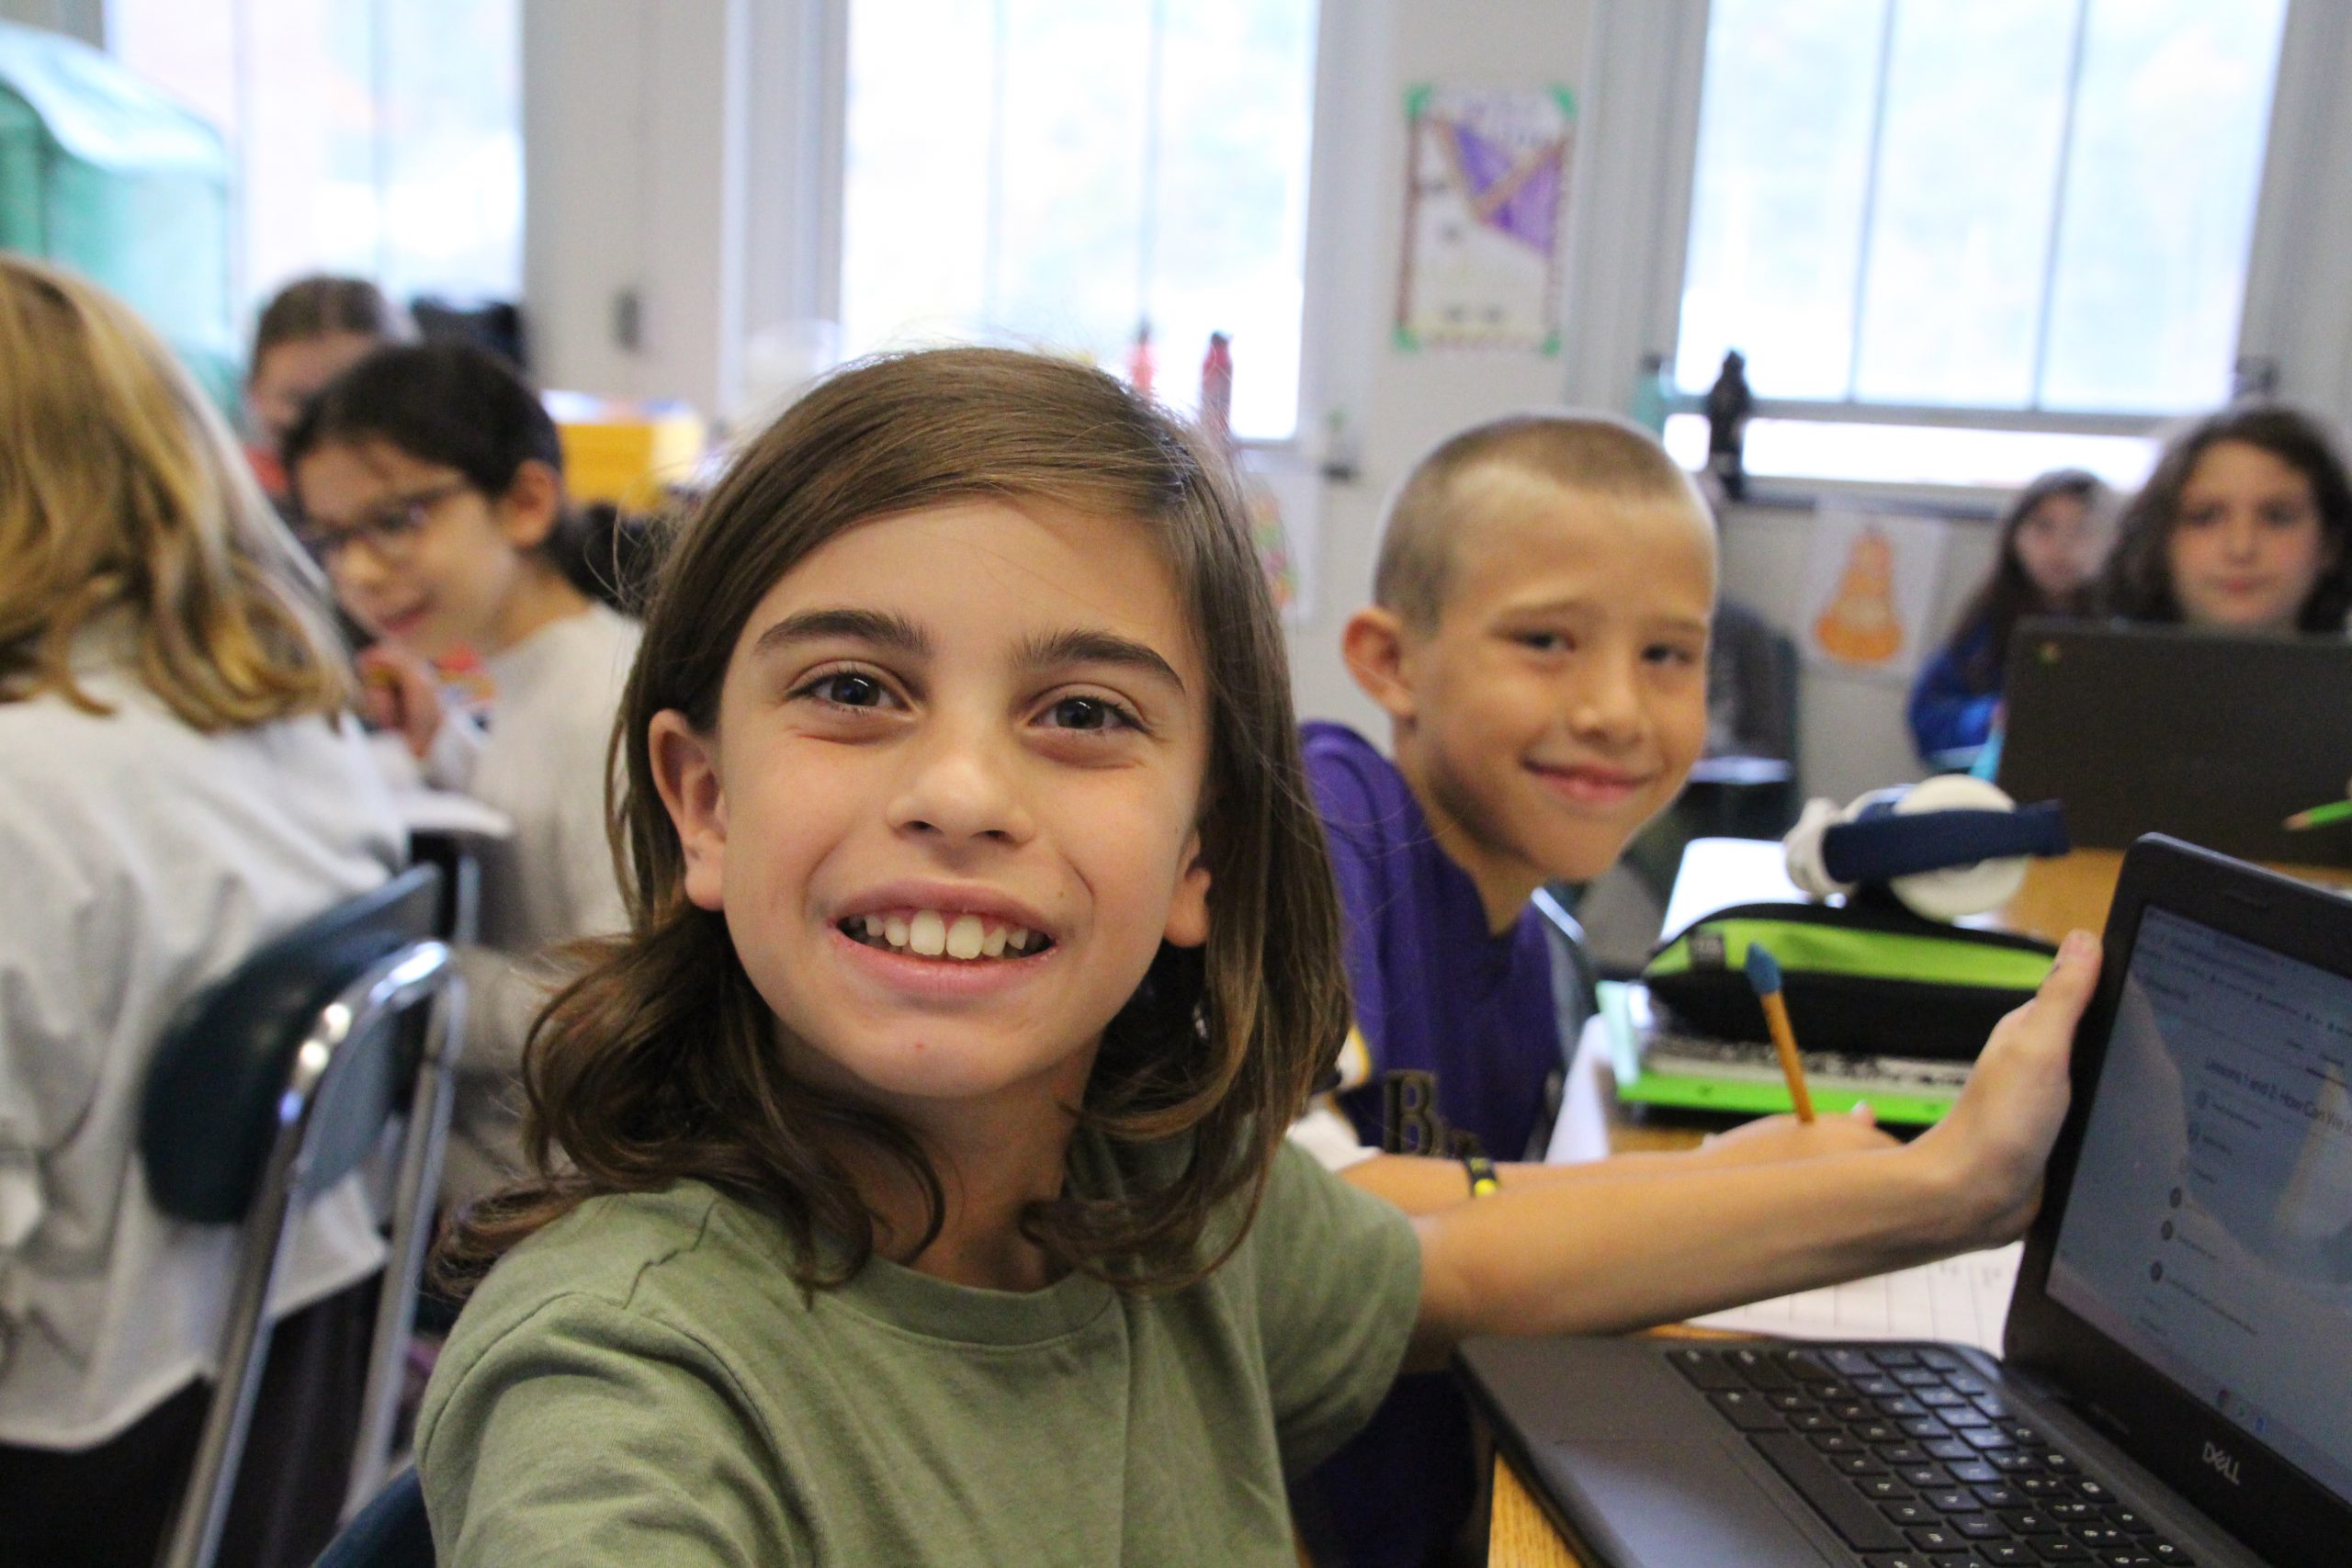 An elementary student smiles for a photo at their desk